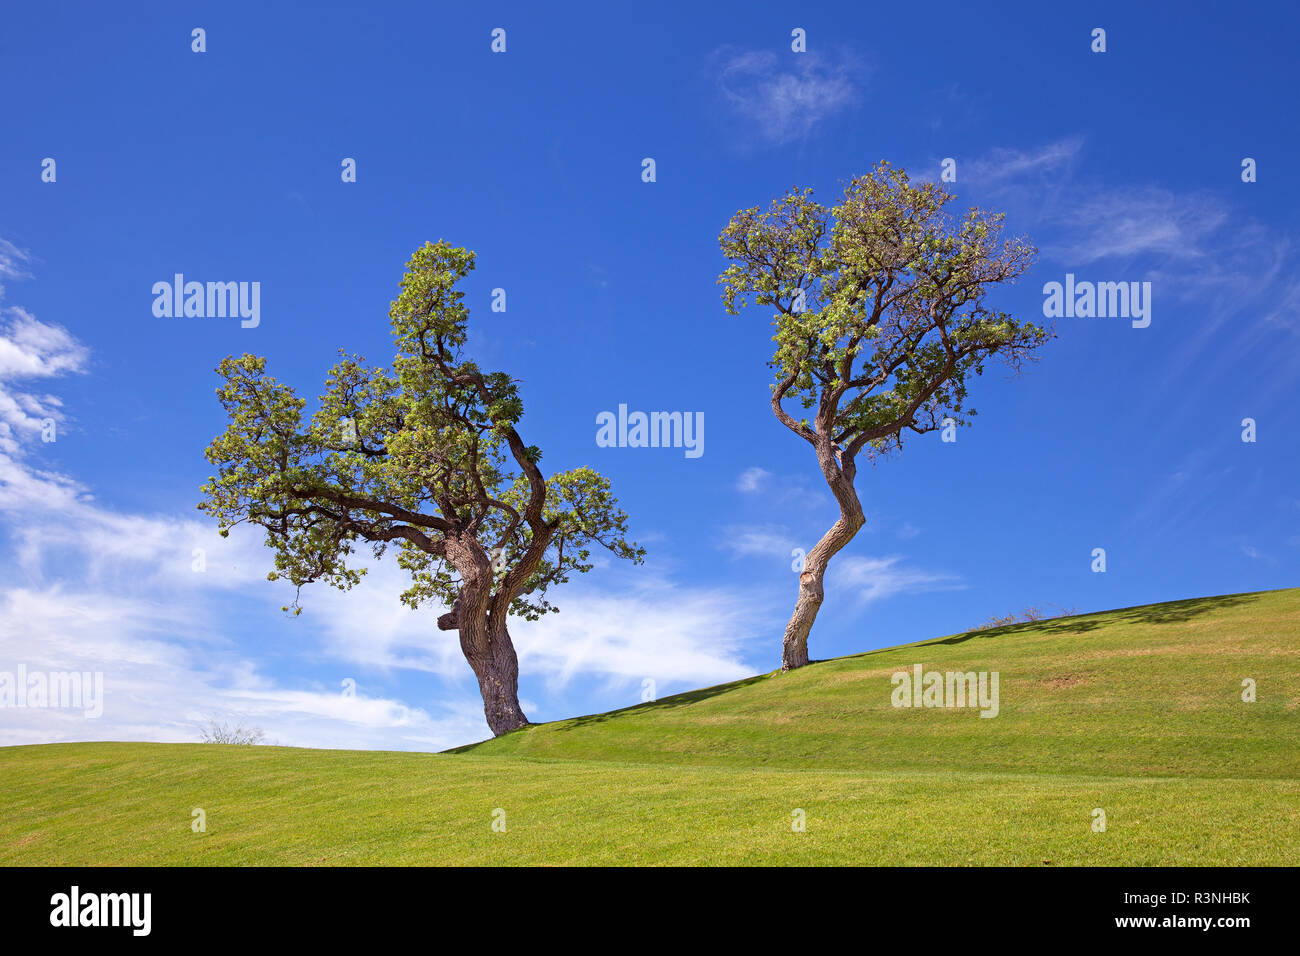 Perfect tree with blue sky and green land Stock Photo